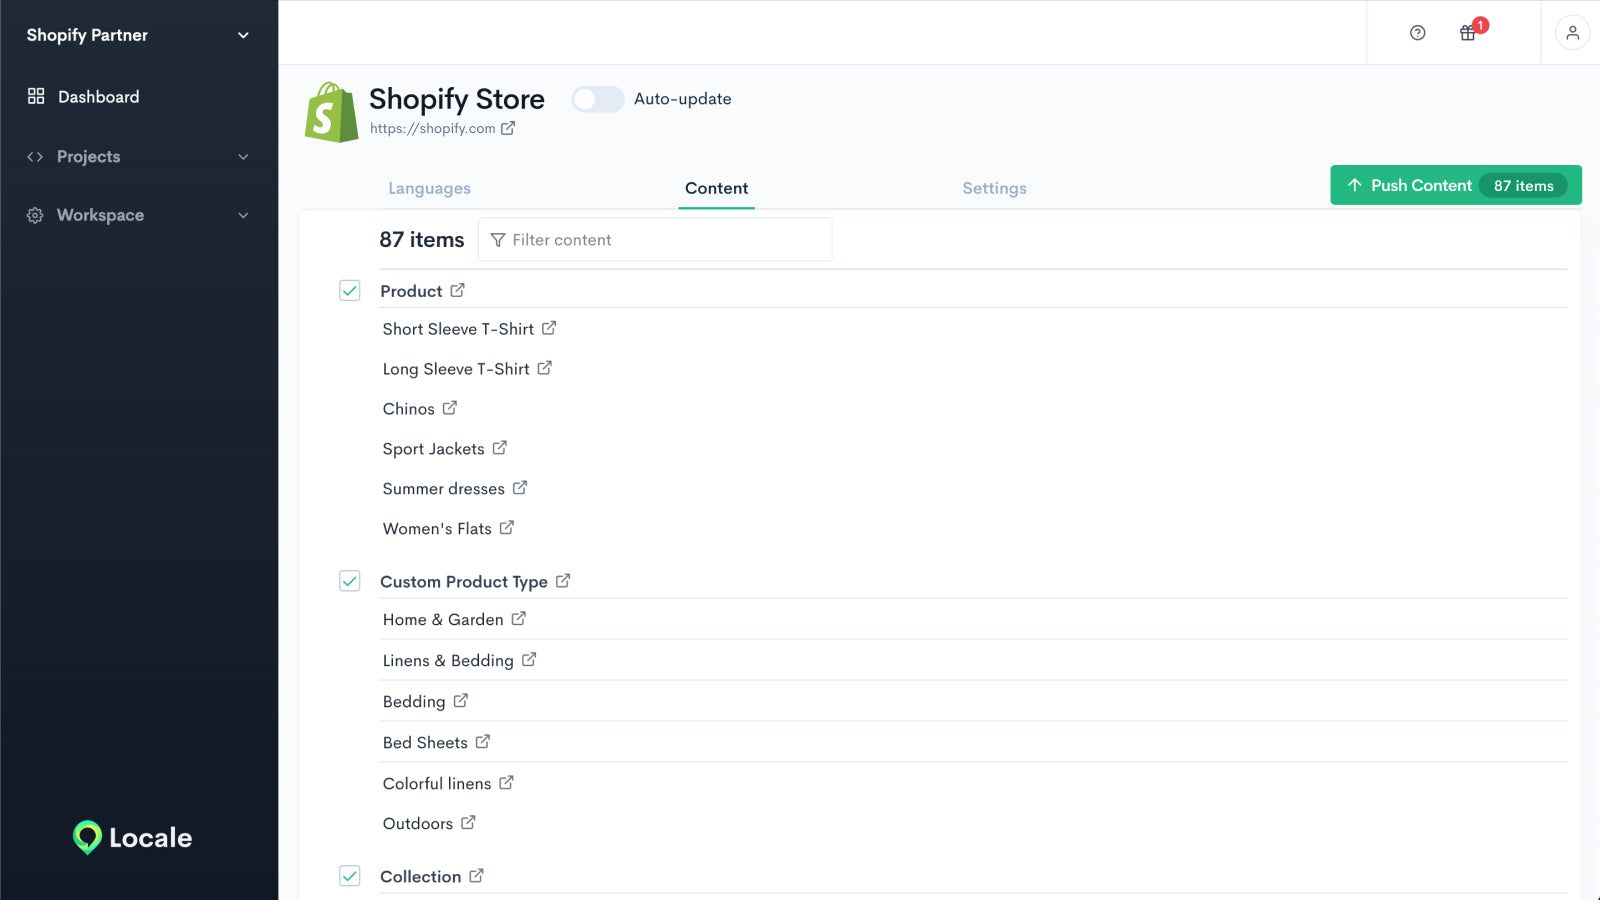 Screen listing all available content from the Shopify store